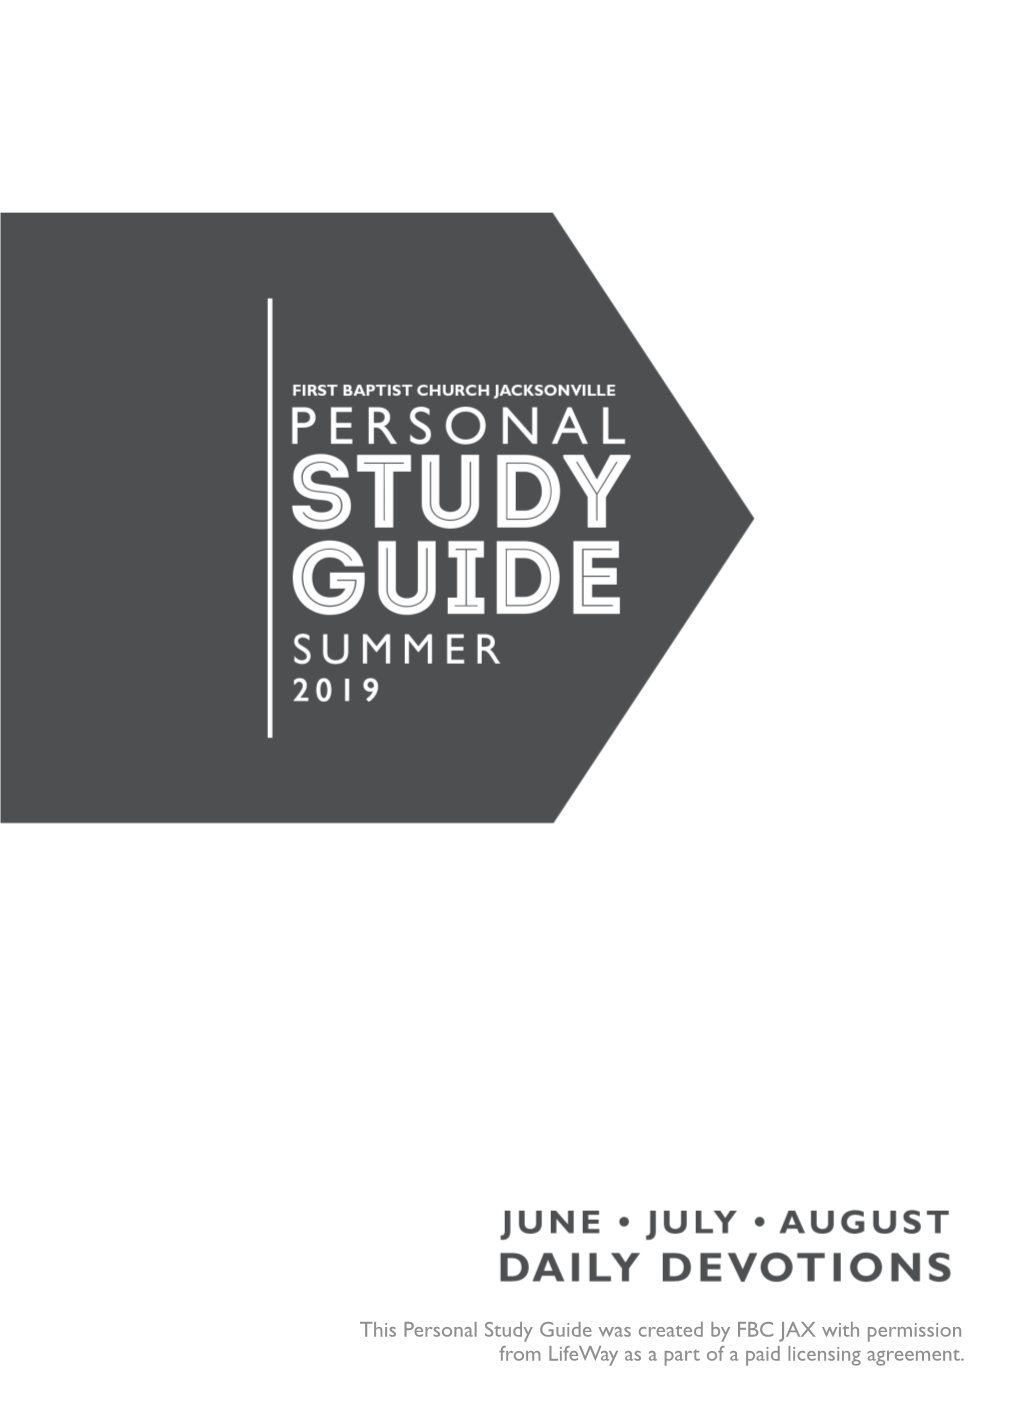 This Personal Study Guide Was Created by FBC JAX with Permission from Lifeway As a Part of a Paid Licensing Agreement